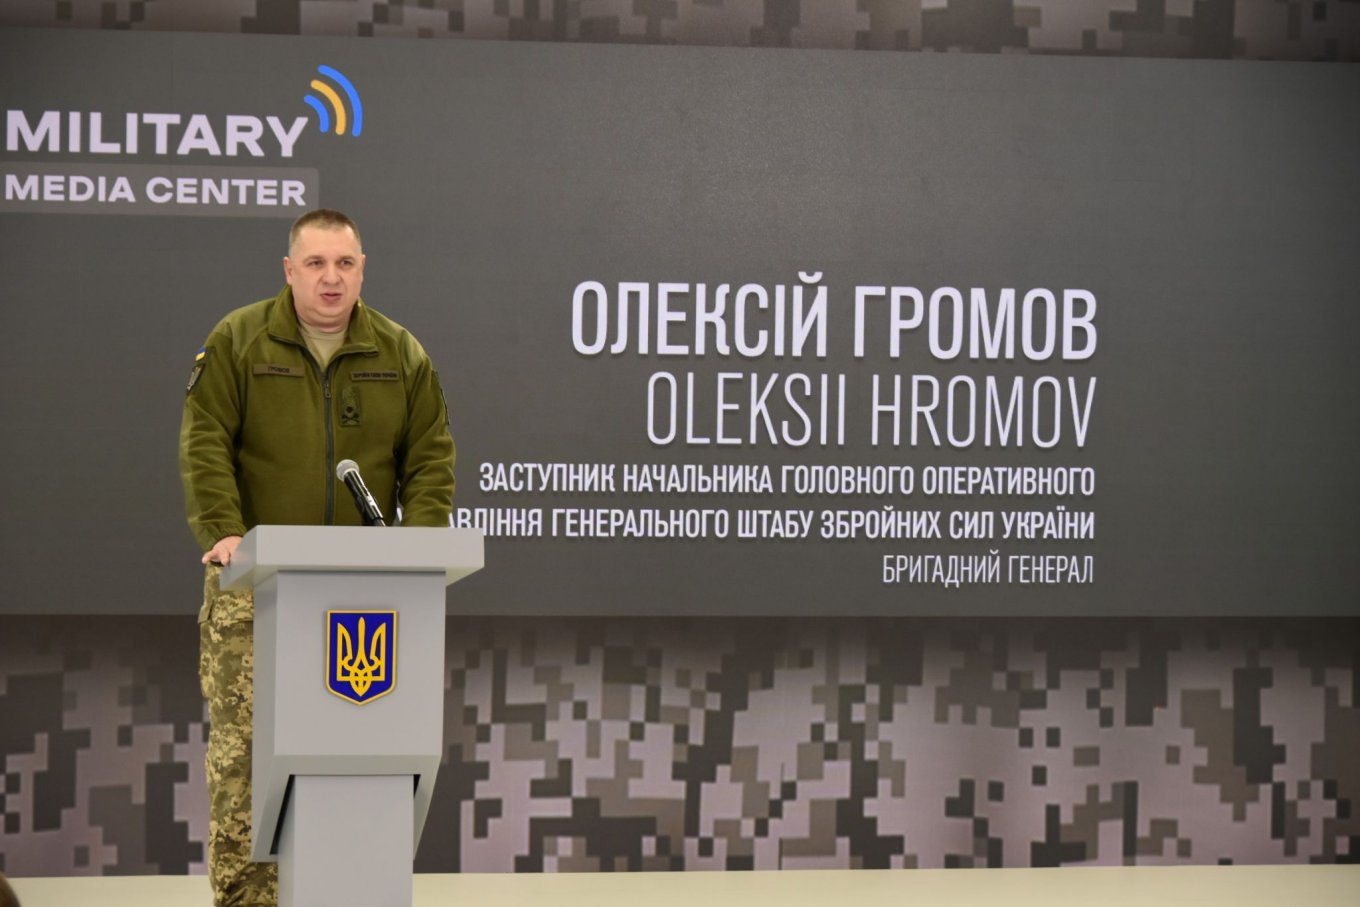 Brigadier General Oleksii Hromov, Deputy Chief of the Main Operational Department of the General Staff of the Armed Forces of Ukraine, Defense Express